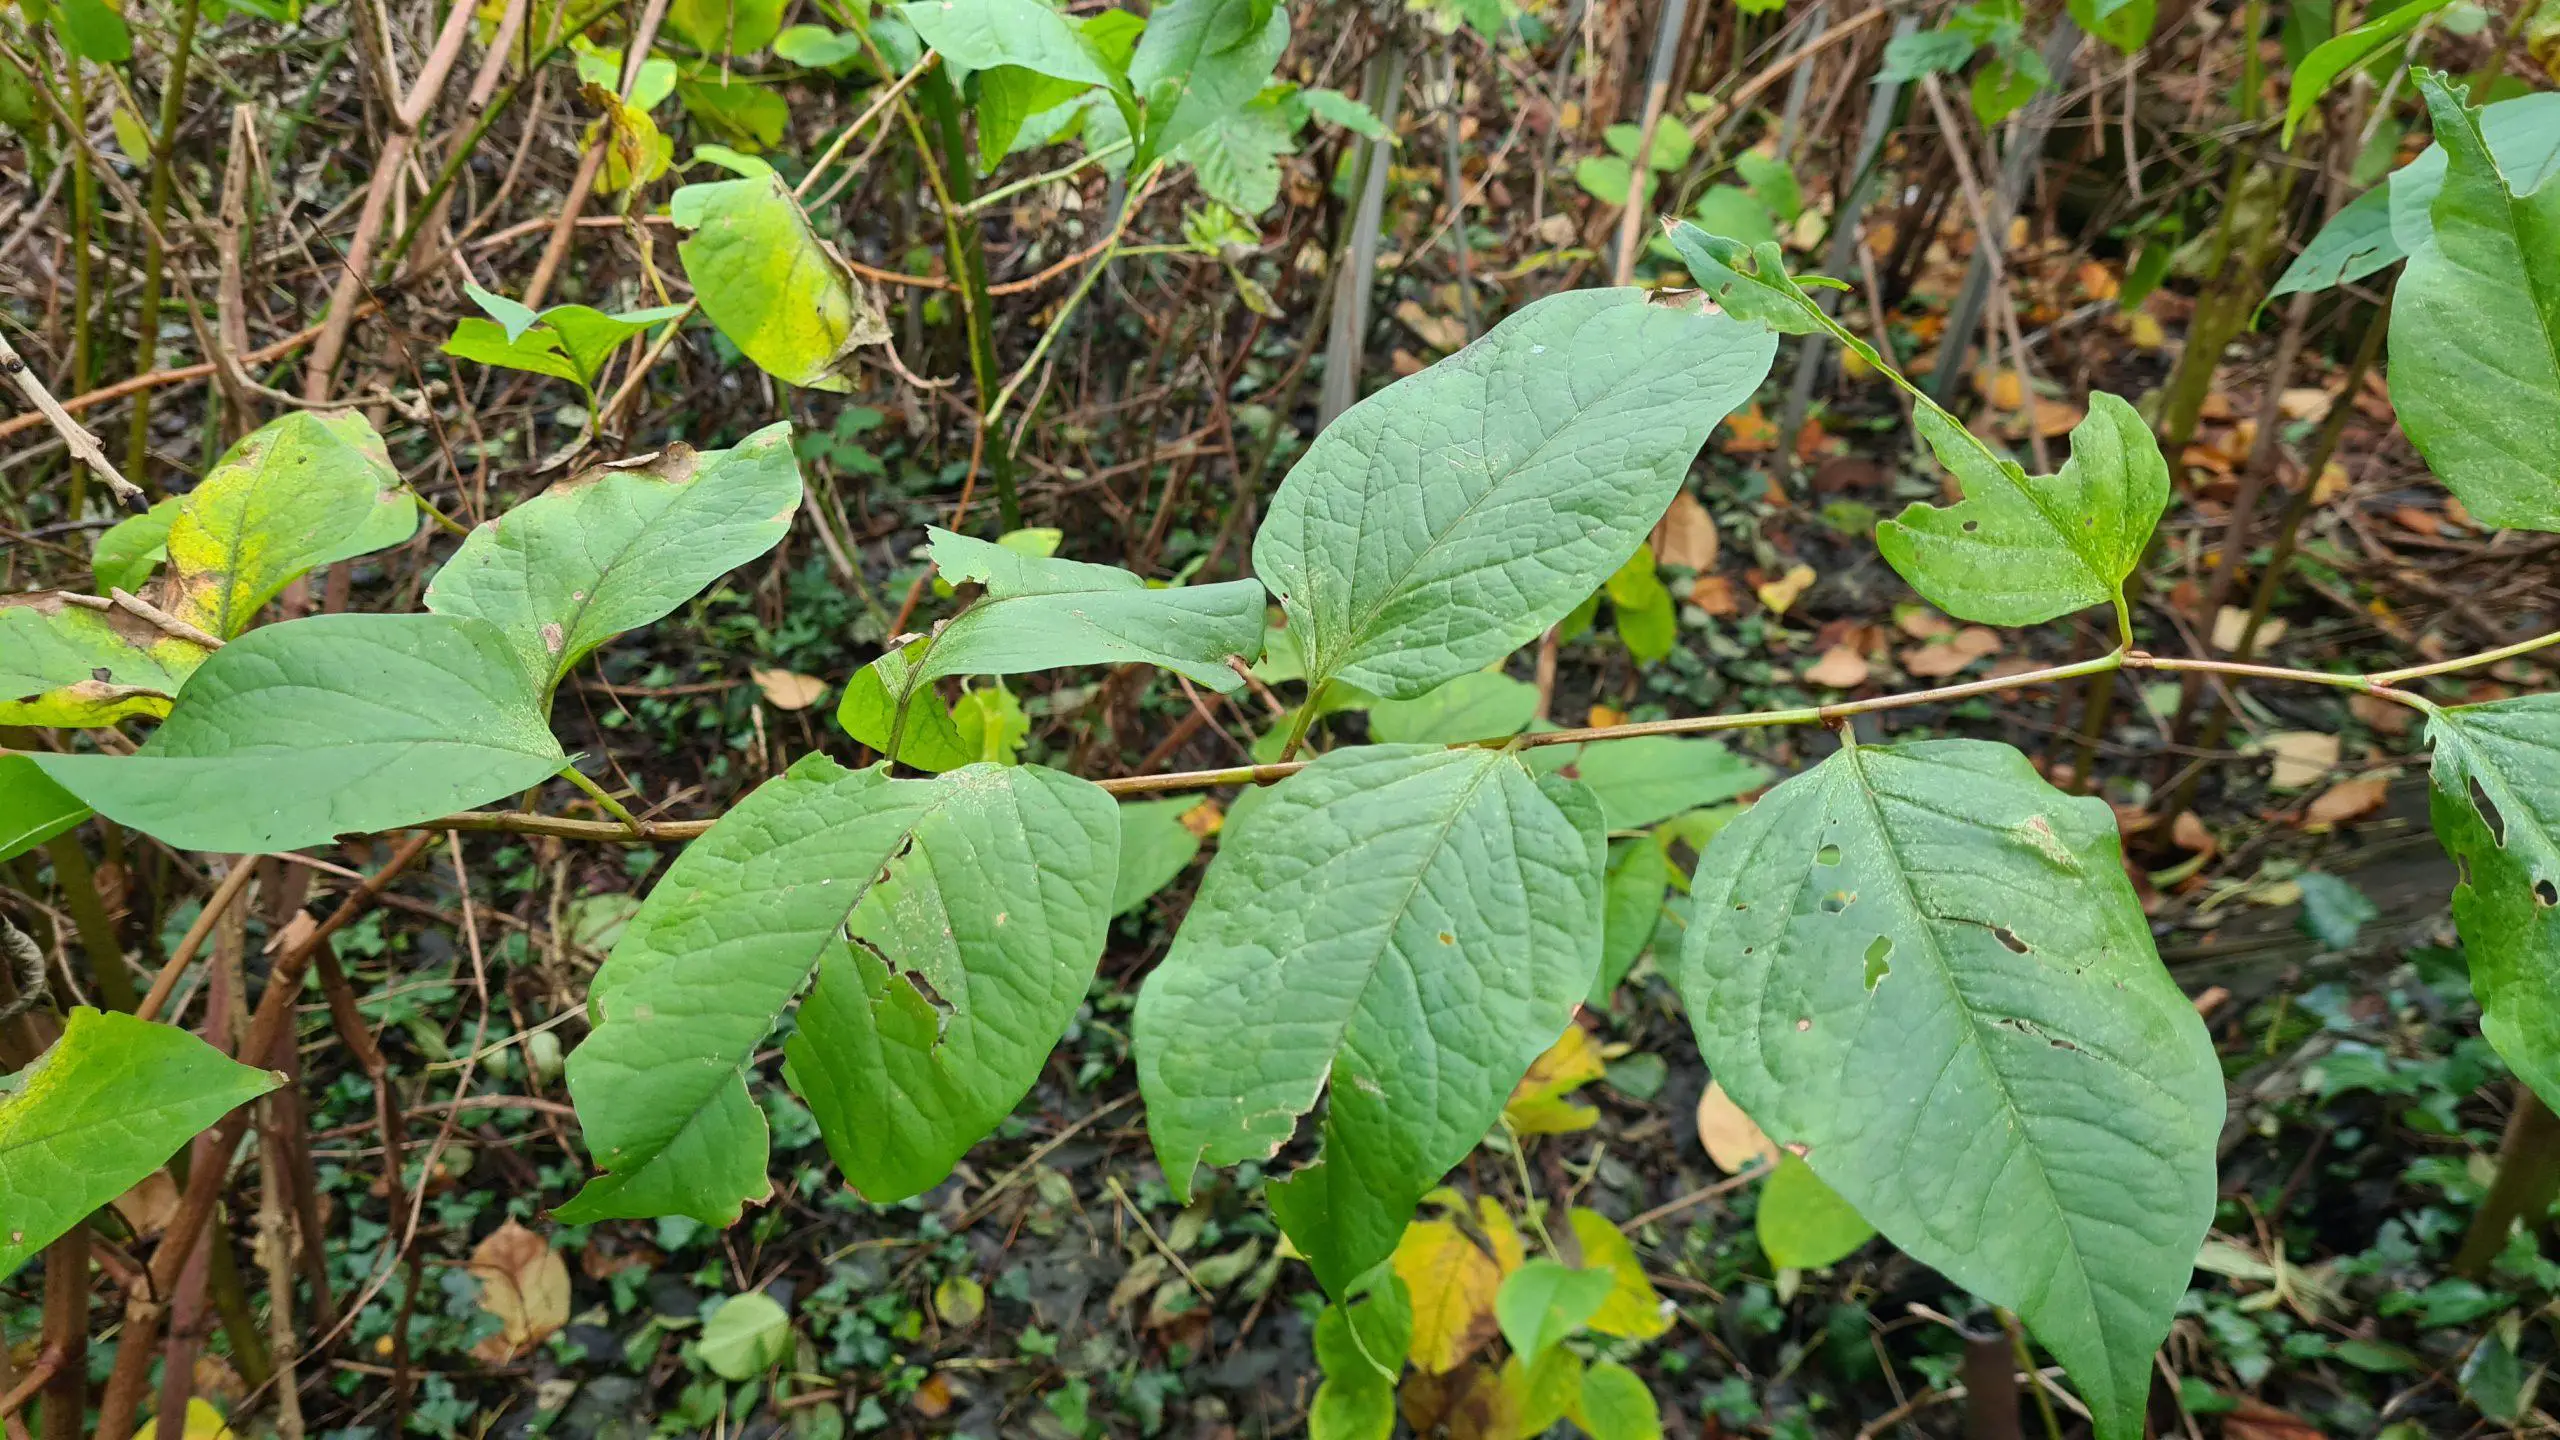 Why is Japanese knotweed a problem on your property